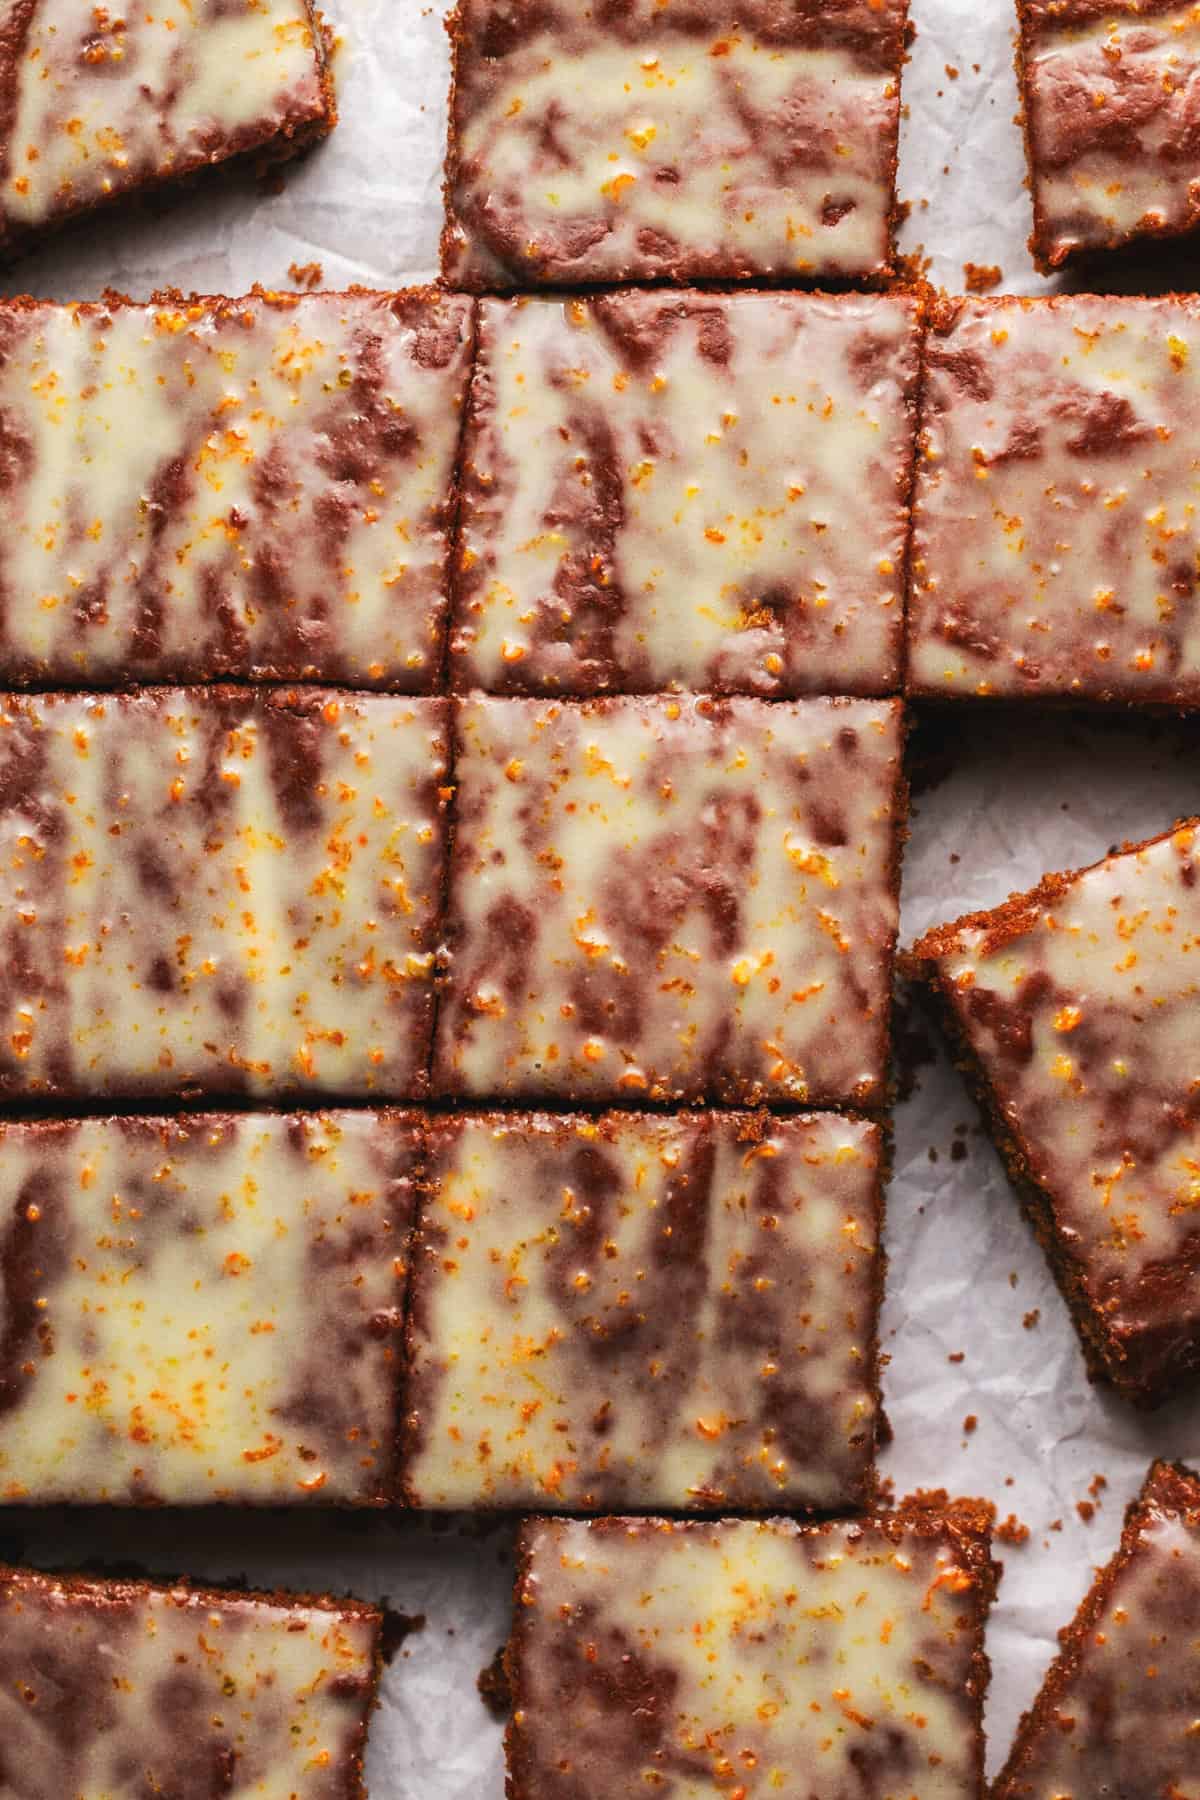 gingerbread cake cut into squares and topped with glaze on parchment paper